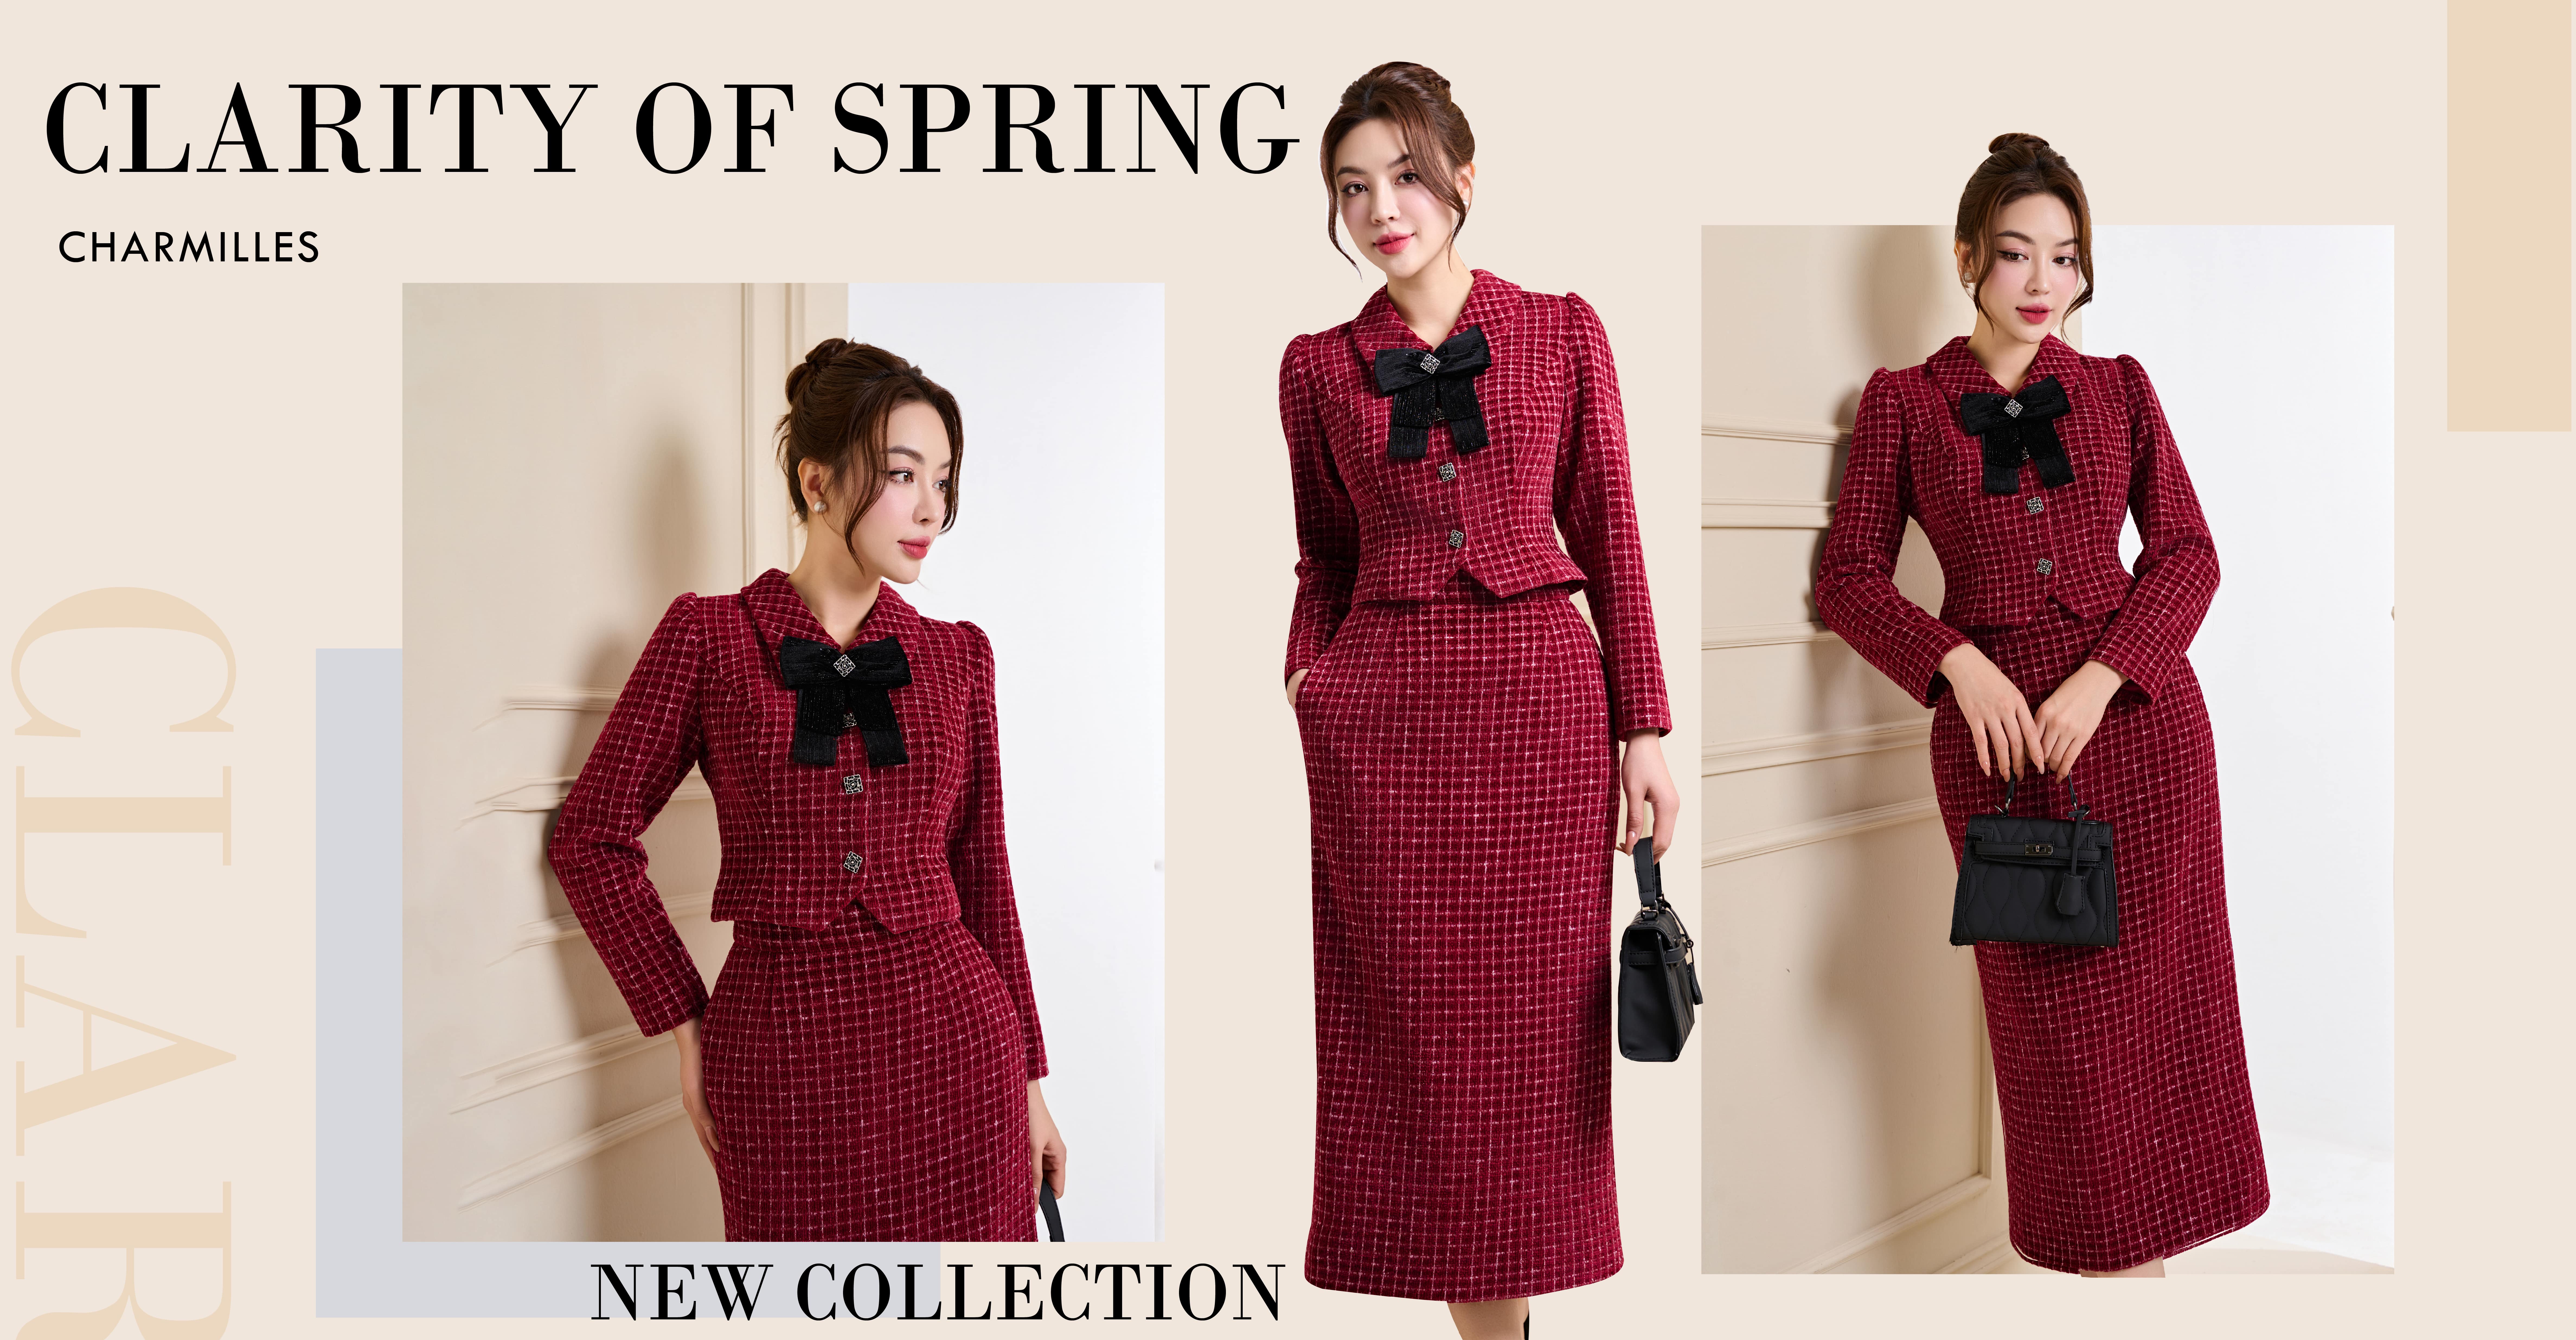 New Collection - Clarity of Spring